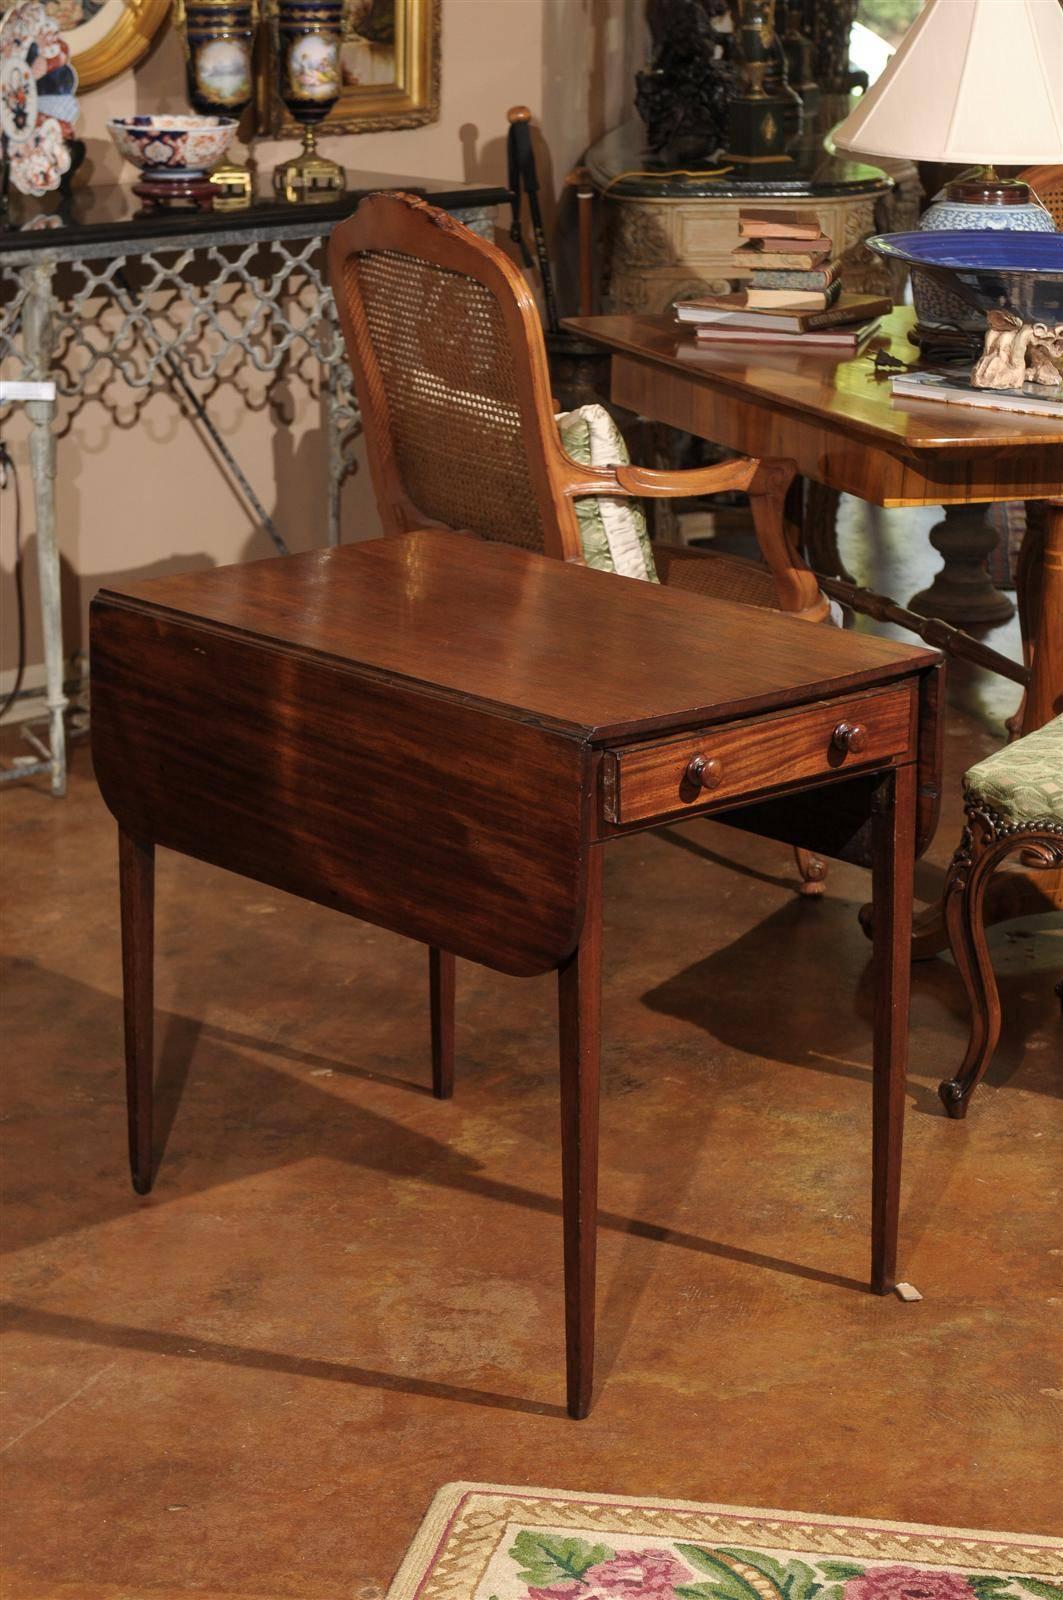 A lovely table with D-shaped drop leaves, single drawer and opposing faux drawer on tapered legs. The two drop leaves are 10 in. each making the width 39 in. when opened.